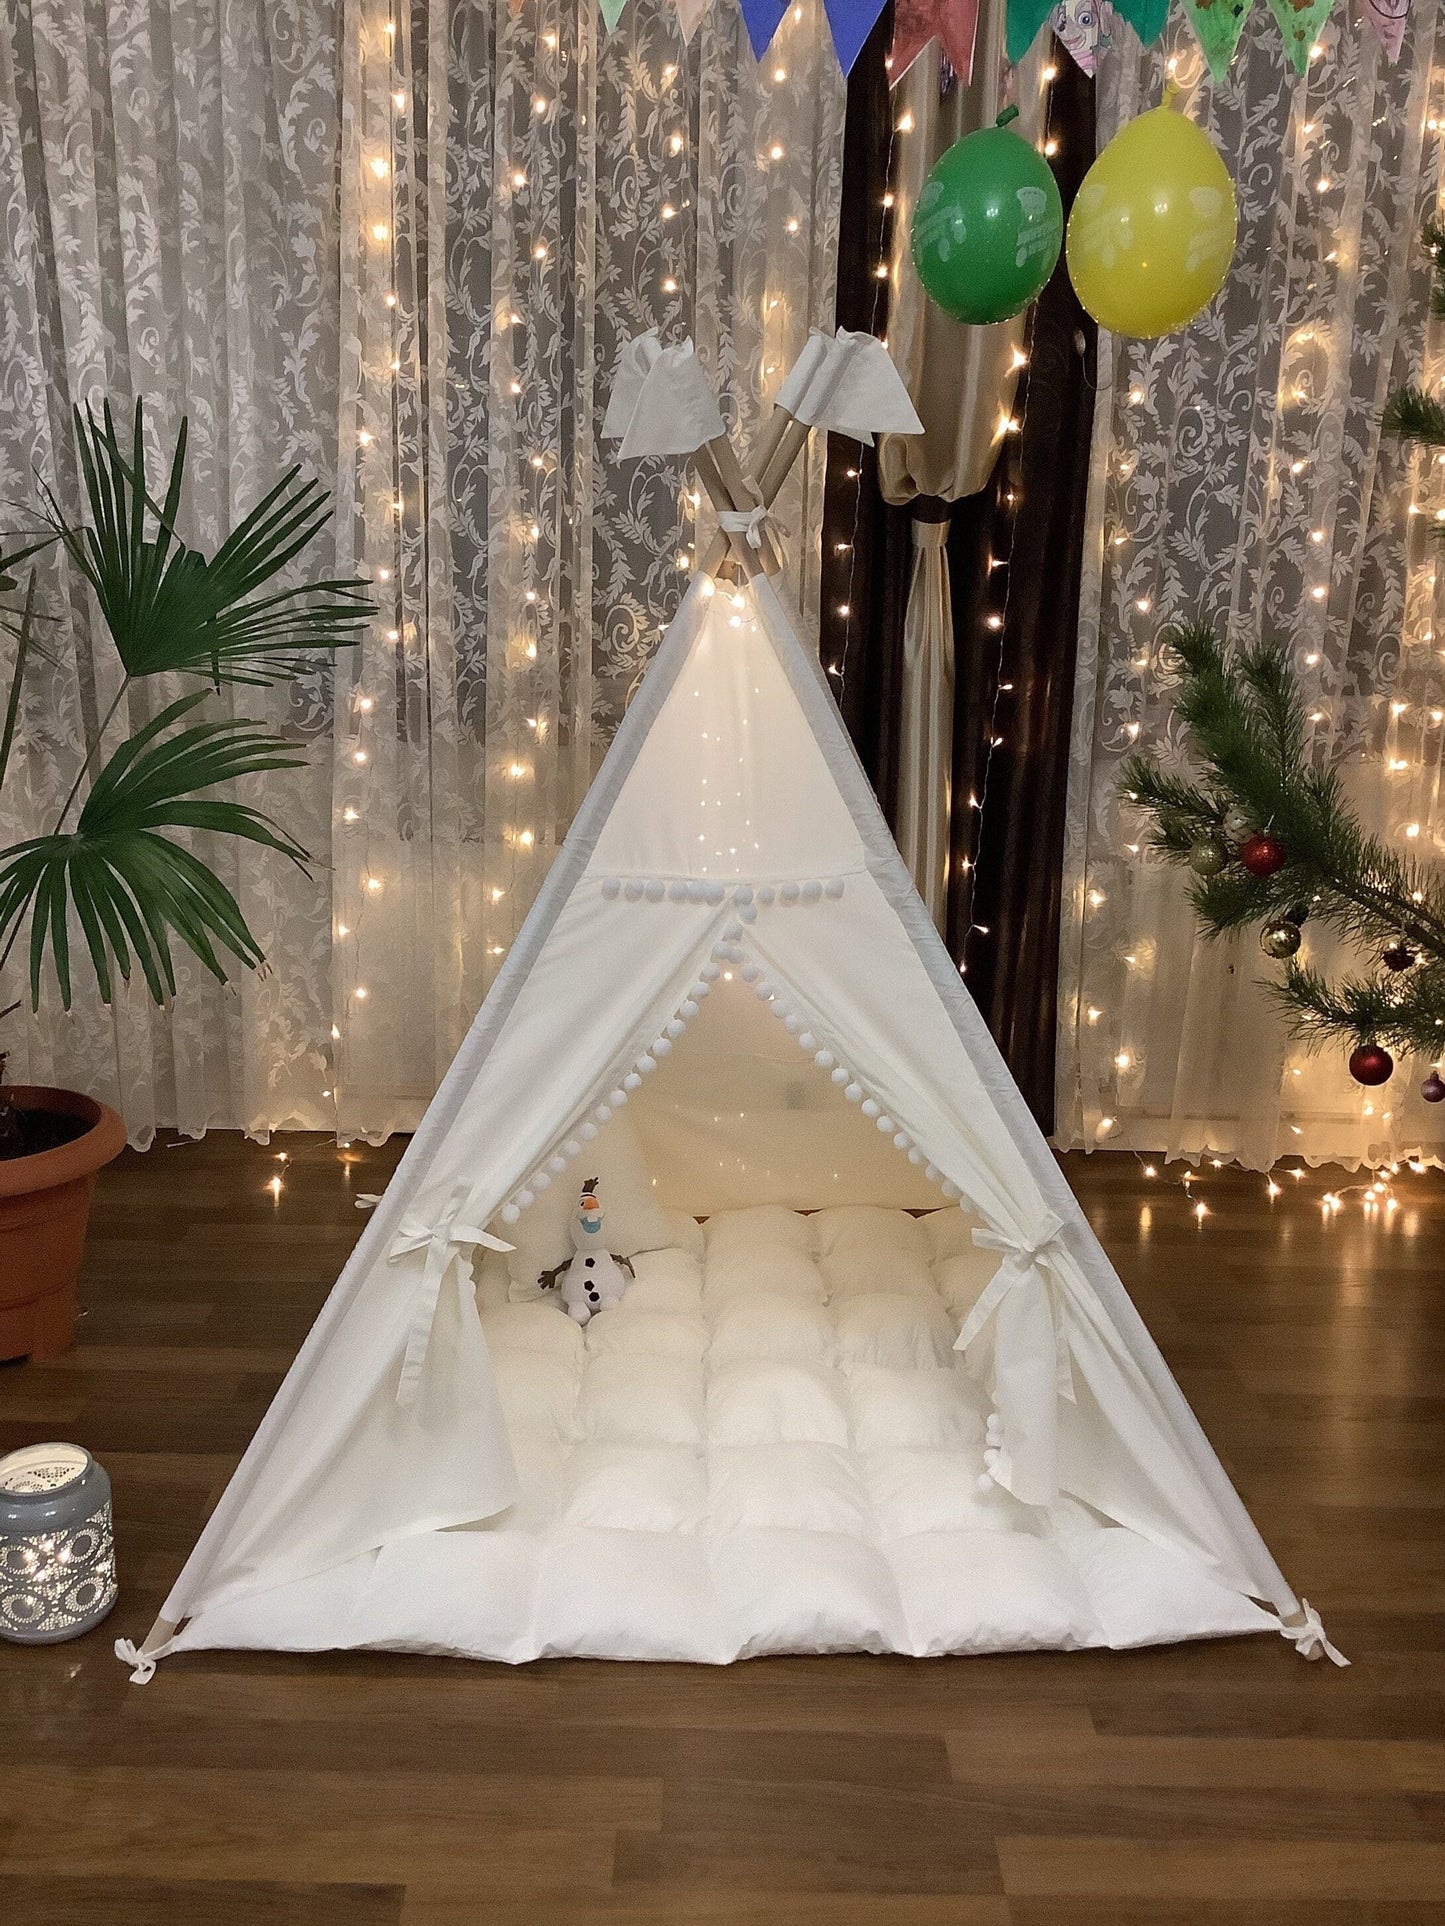 Teepees for kids, Tent Ivory ,Beige, Gray tent, Christmas gift Teepee, ecru fabric tent with Window Mat Tepee  for Girl montessori furniture